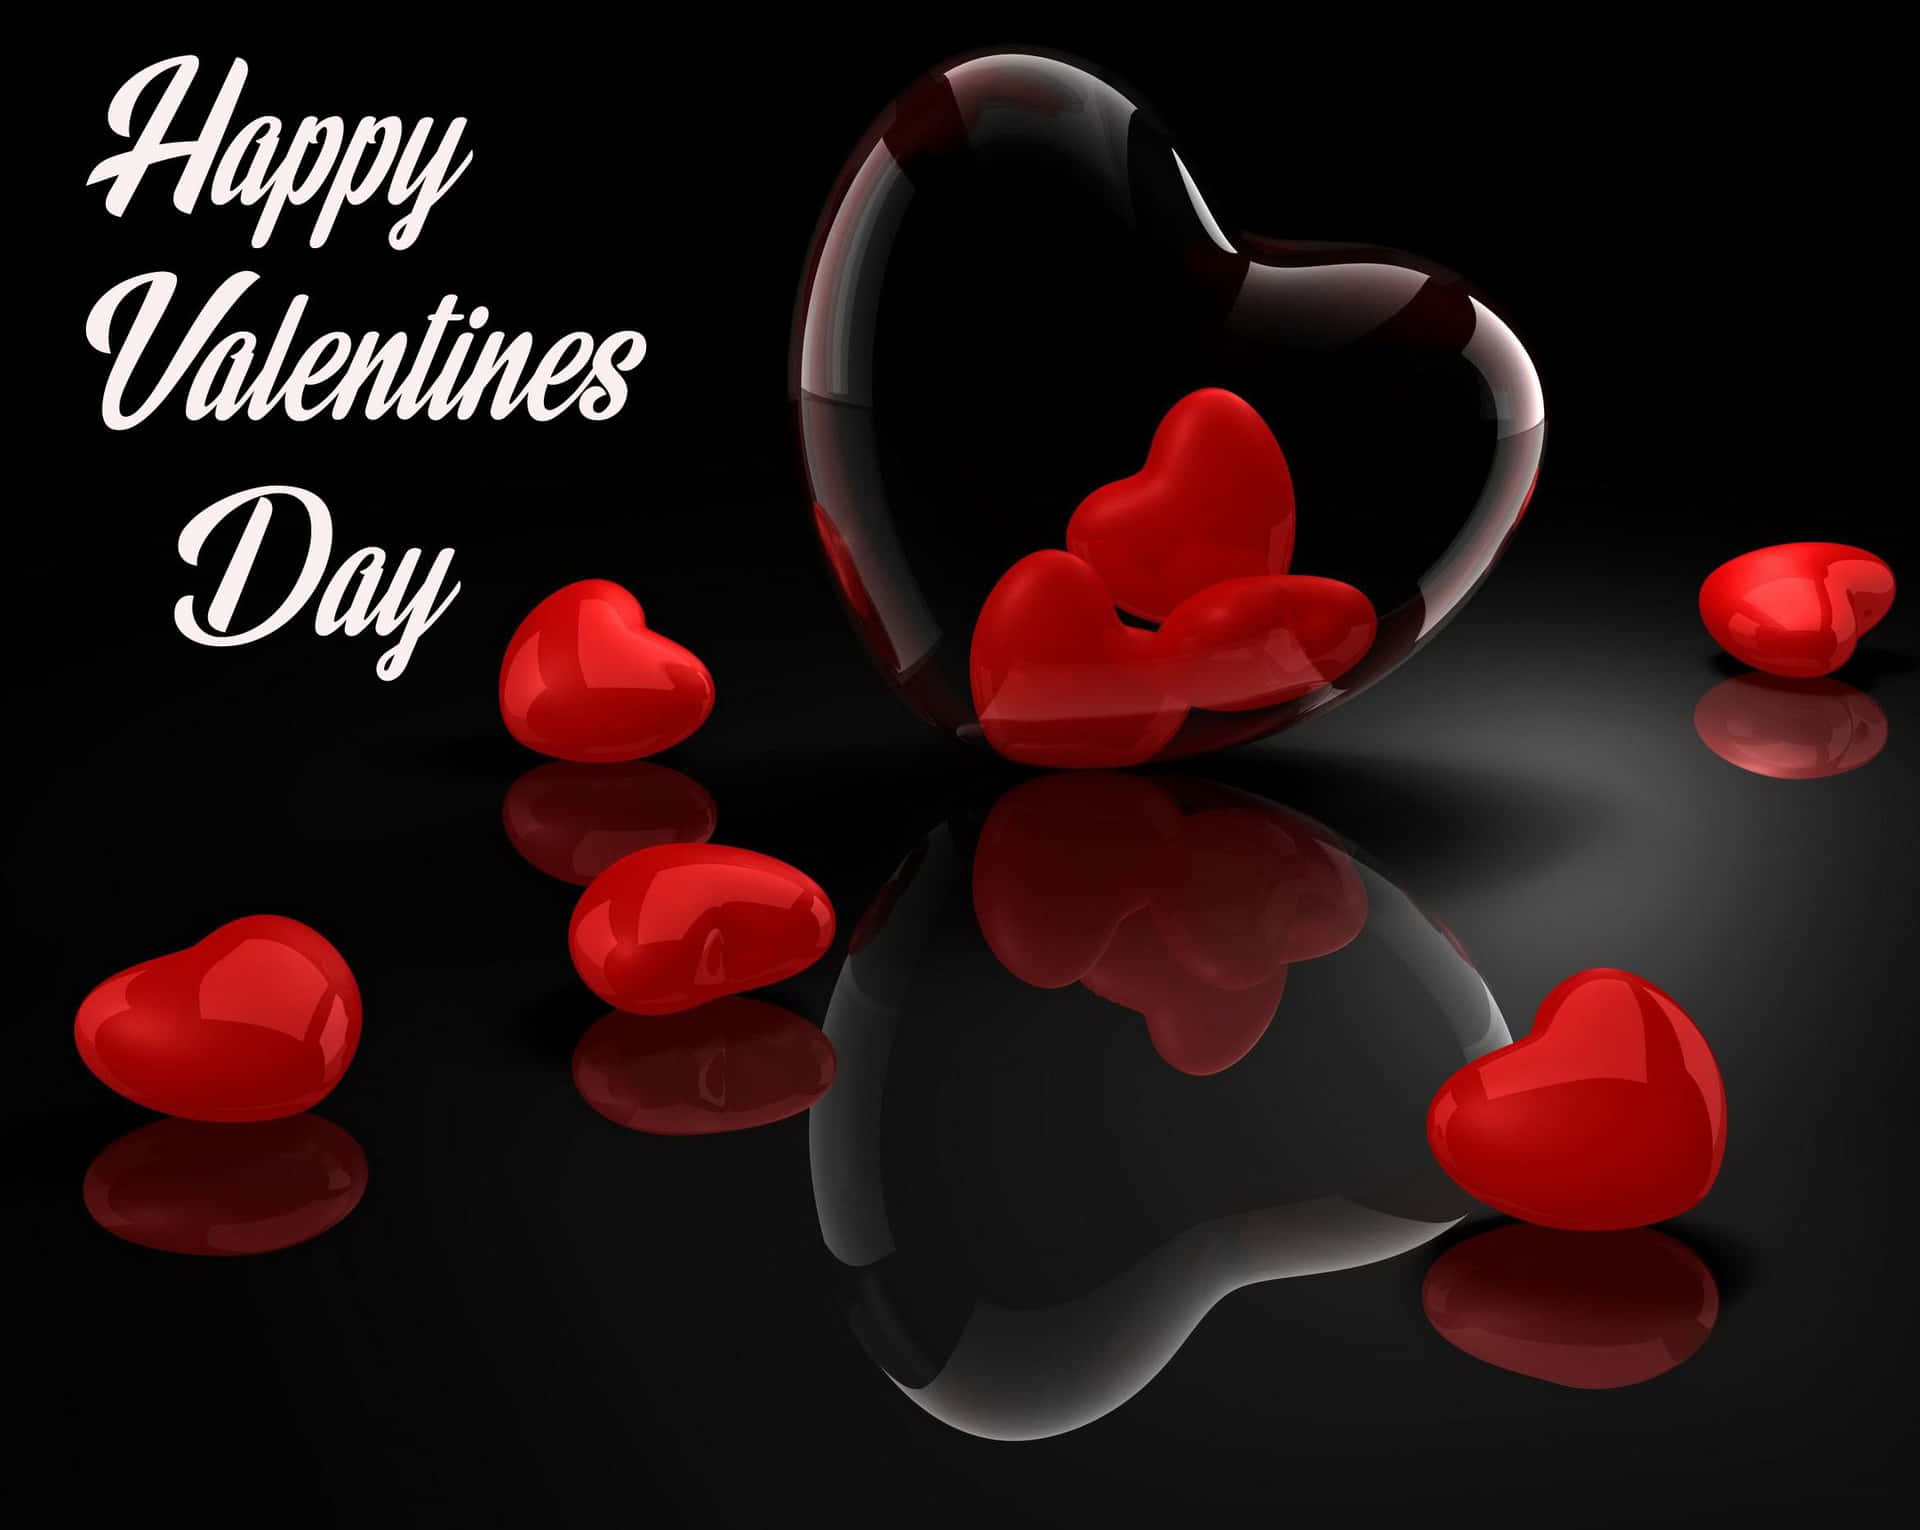 Celebrate the season of love with this vibrant Valentine's Day wallpaper. Wallpaper